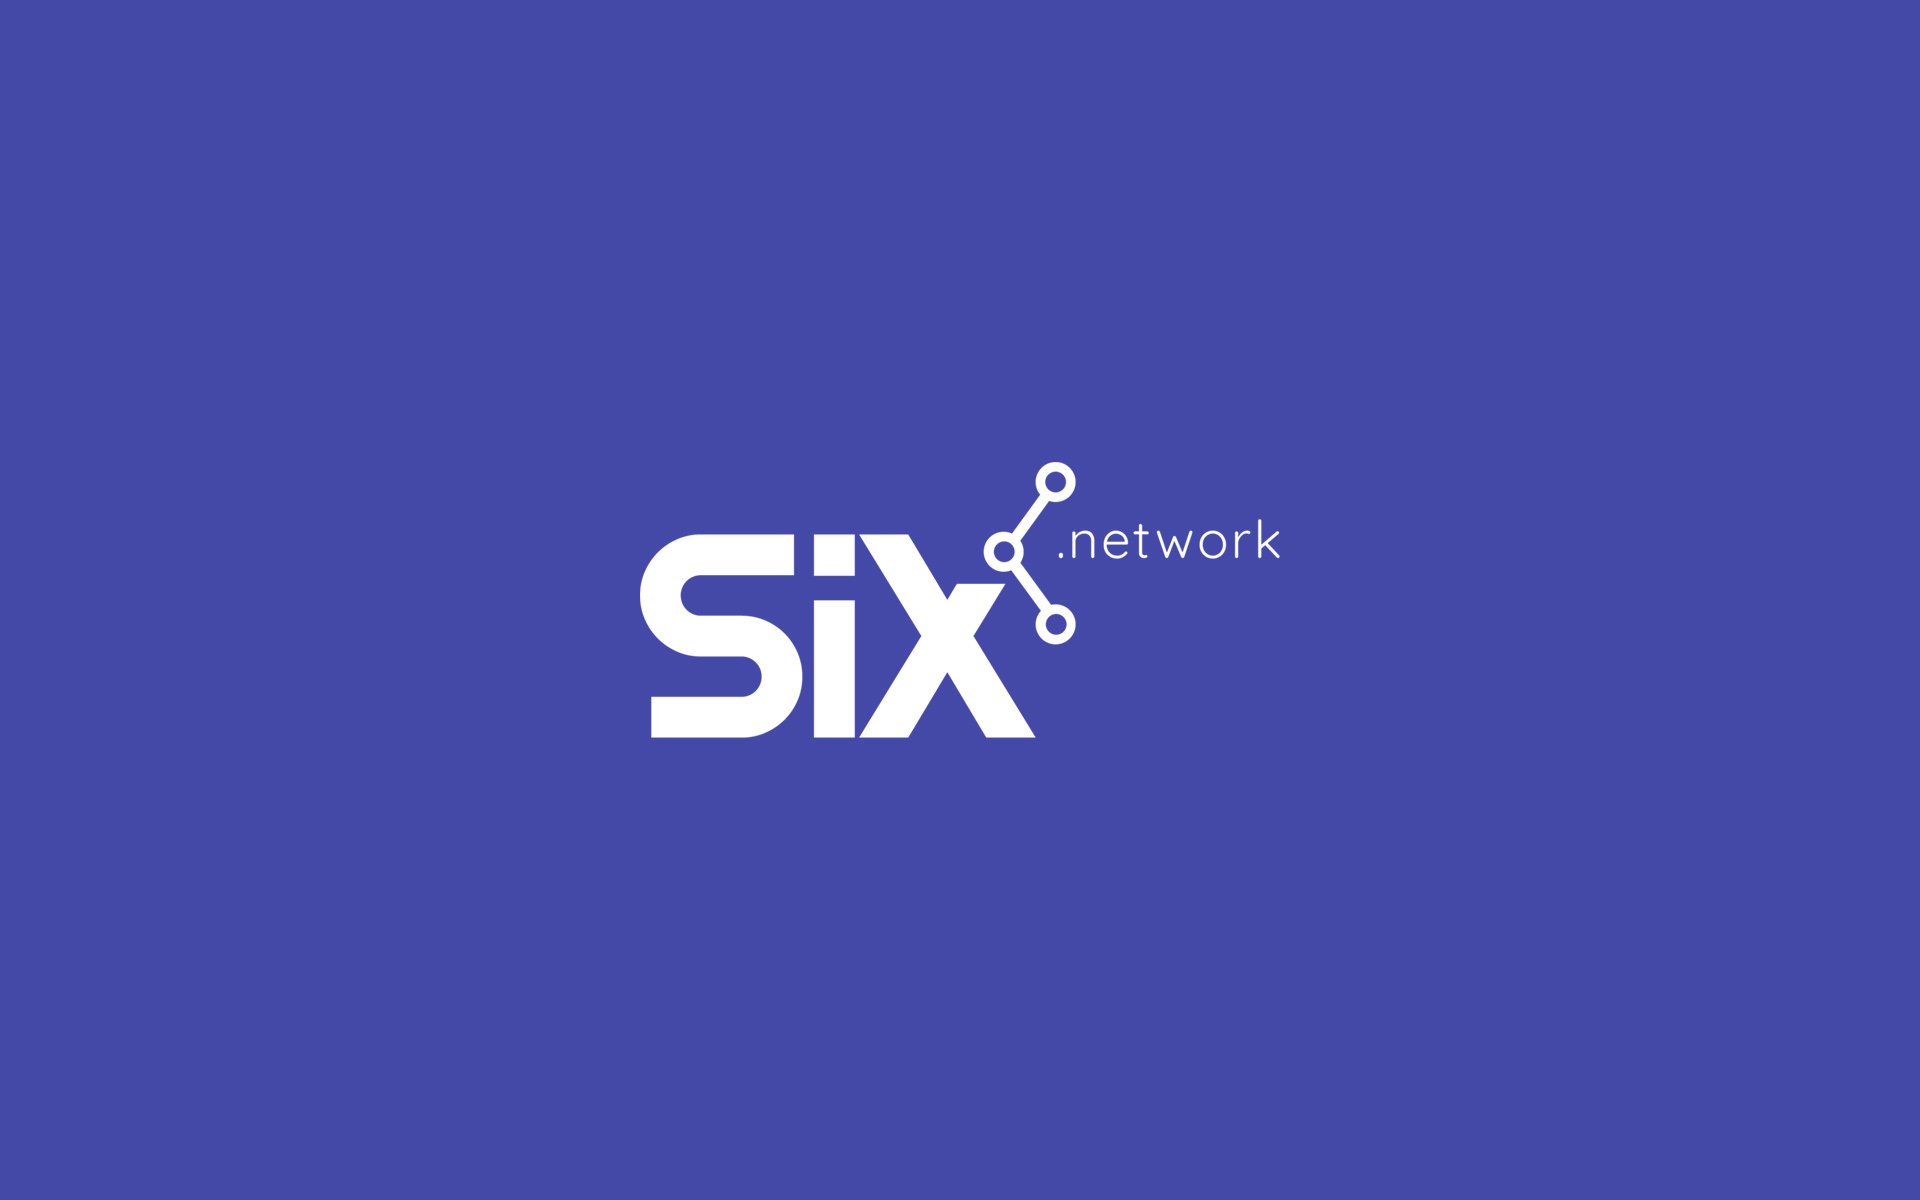 SIX.network Partners With Global Alliance To Launch Blockbuster ICO & Reaches $15M Softcap In One Week